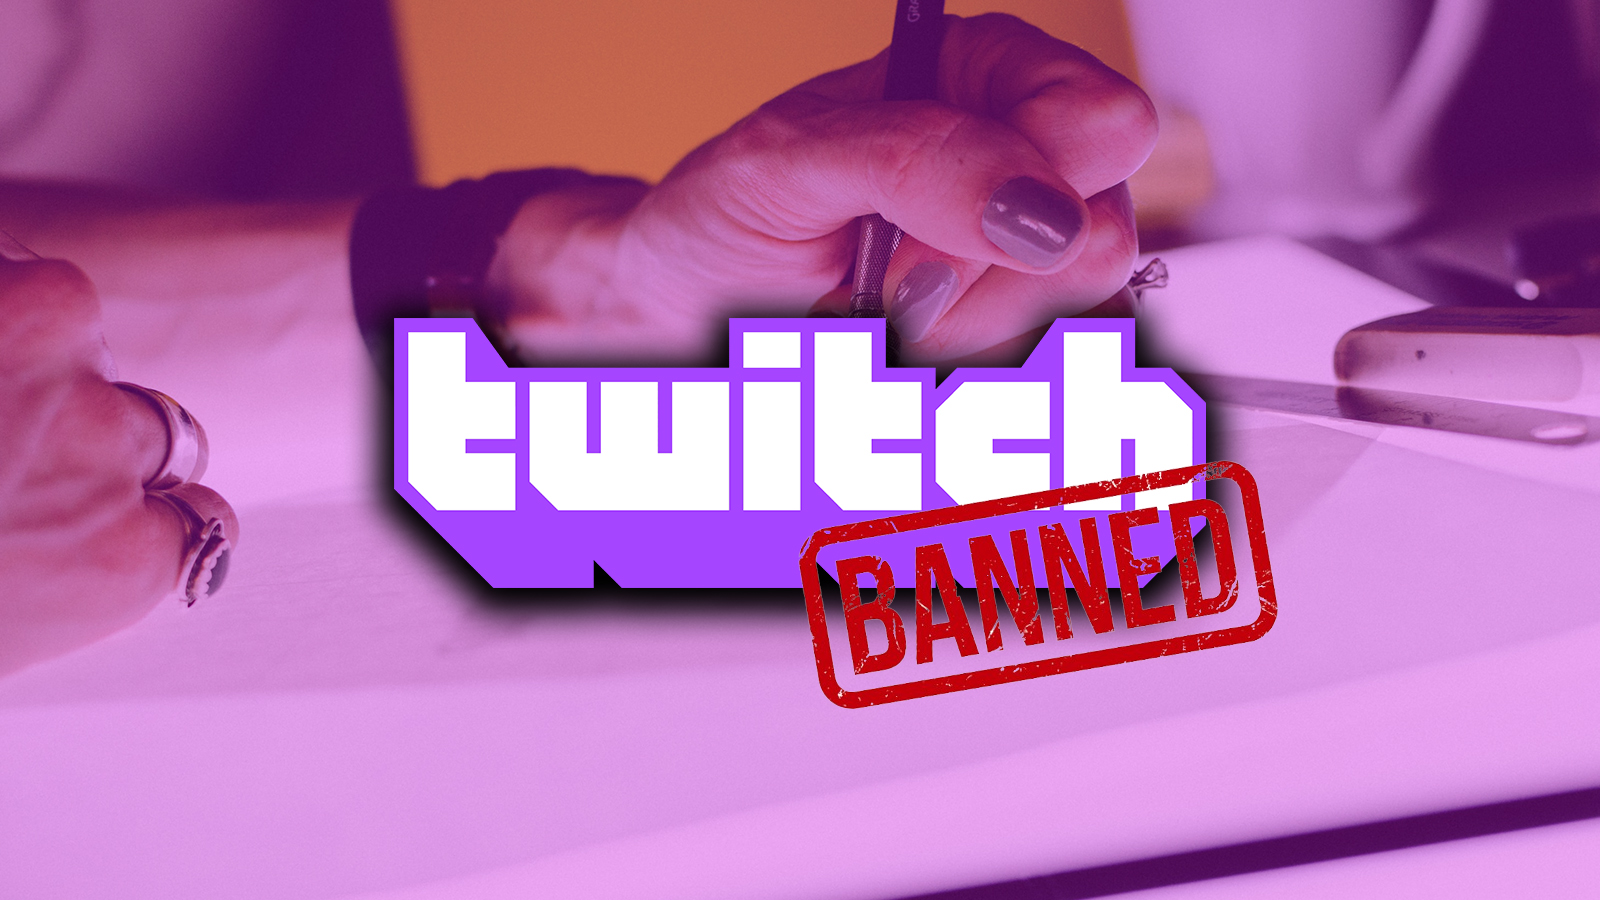 GTA 5 is replacing Just Chatting as Twitch's most popular category - Dexerto